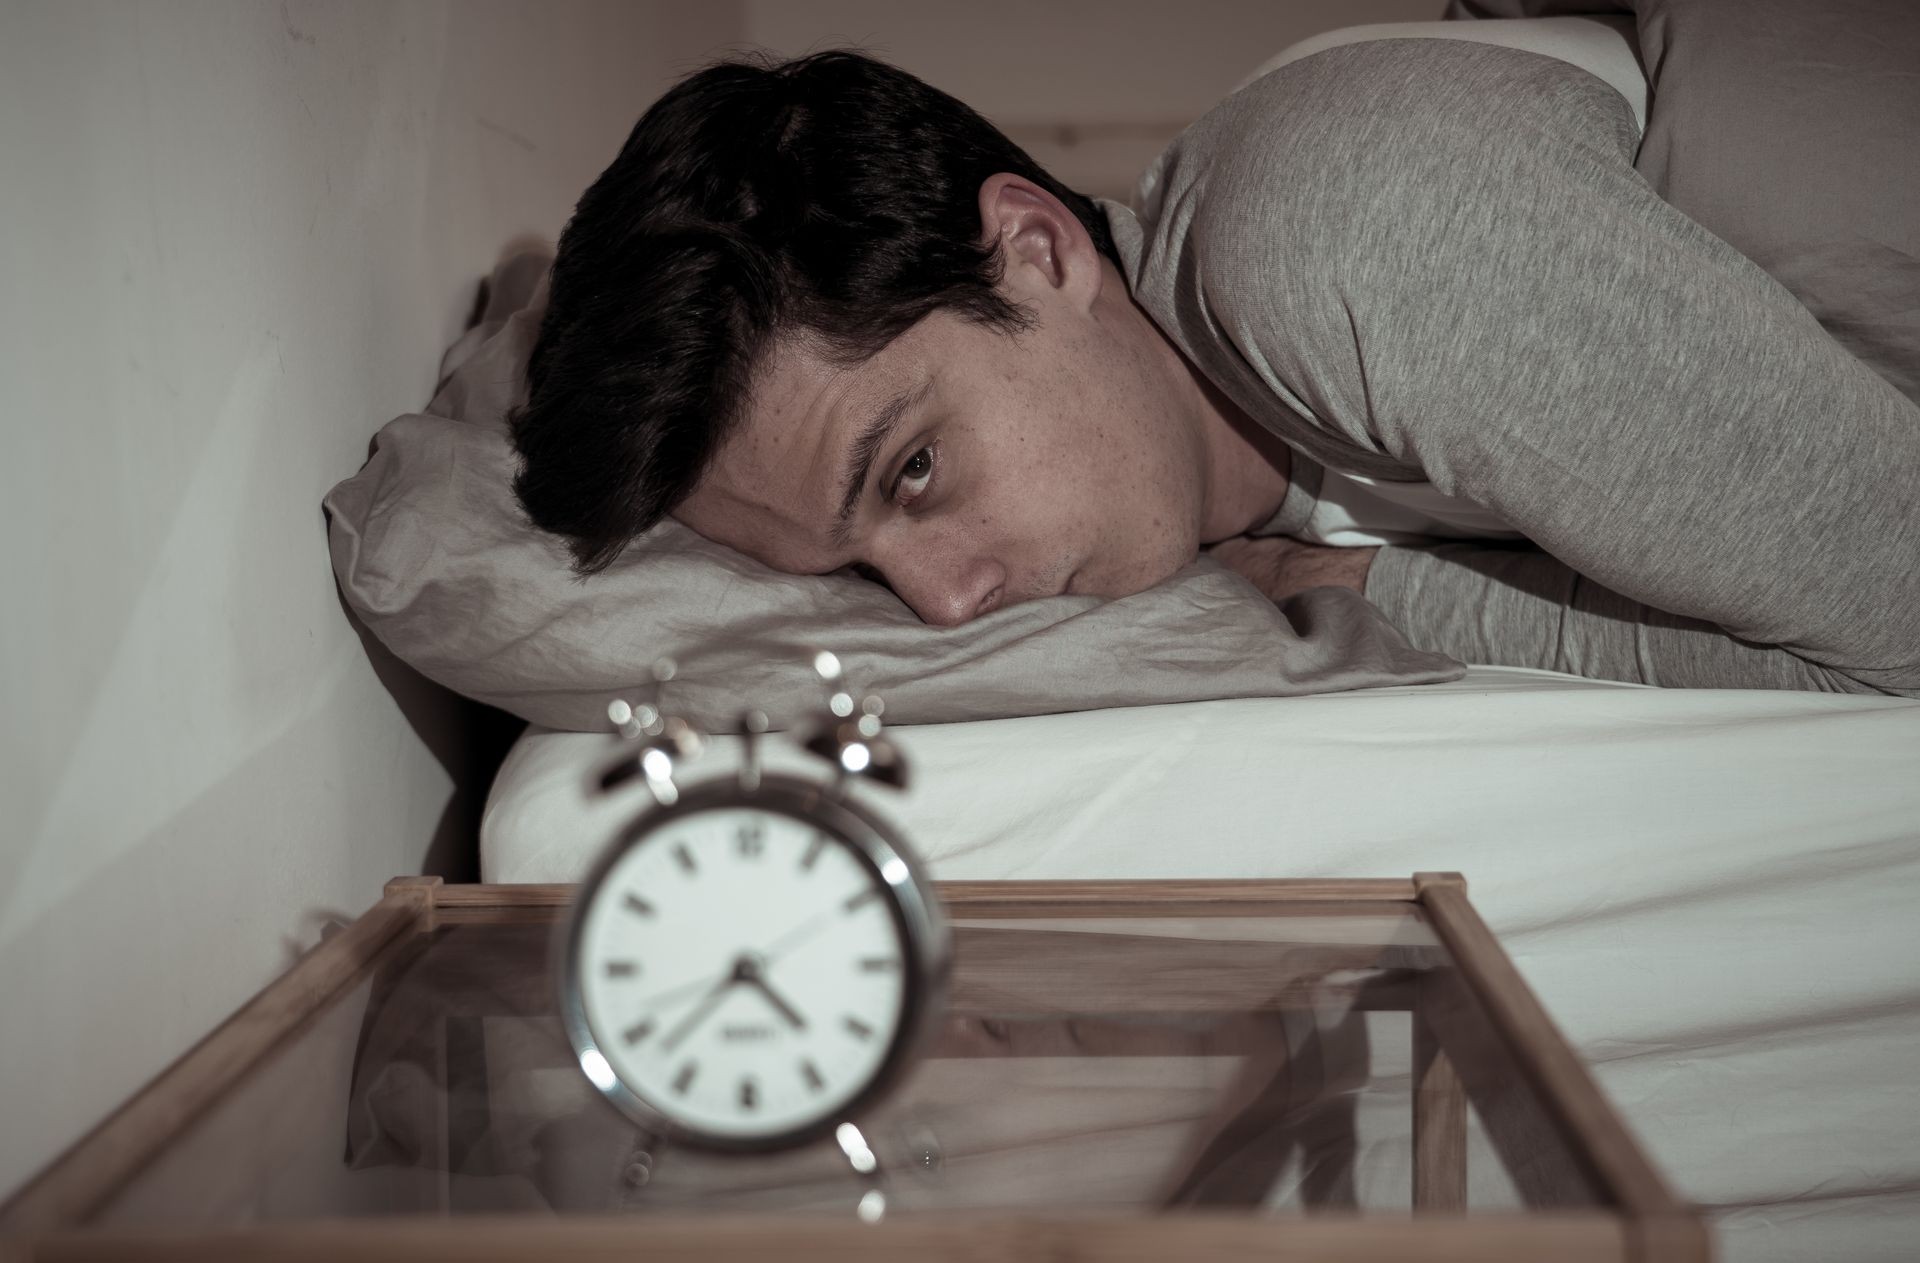 Sleepless and desperate young caucasian man awake at night not able to sleep, feeling frustrated and worried looking at clock suffering from insomnia in stress and sleep disorder concept.